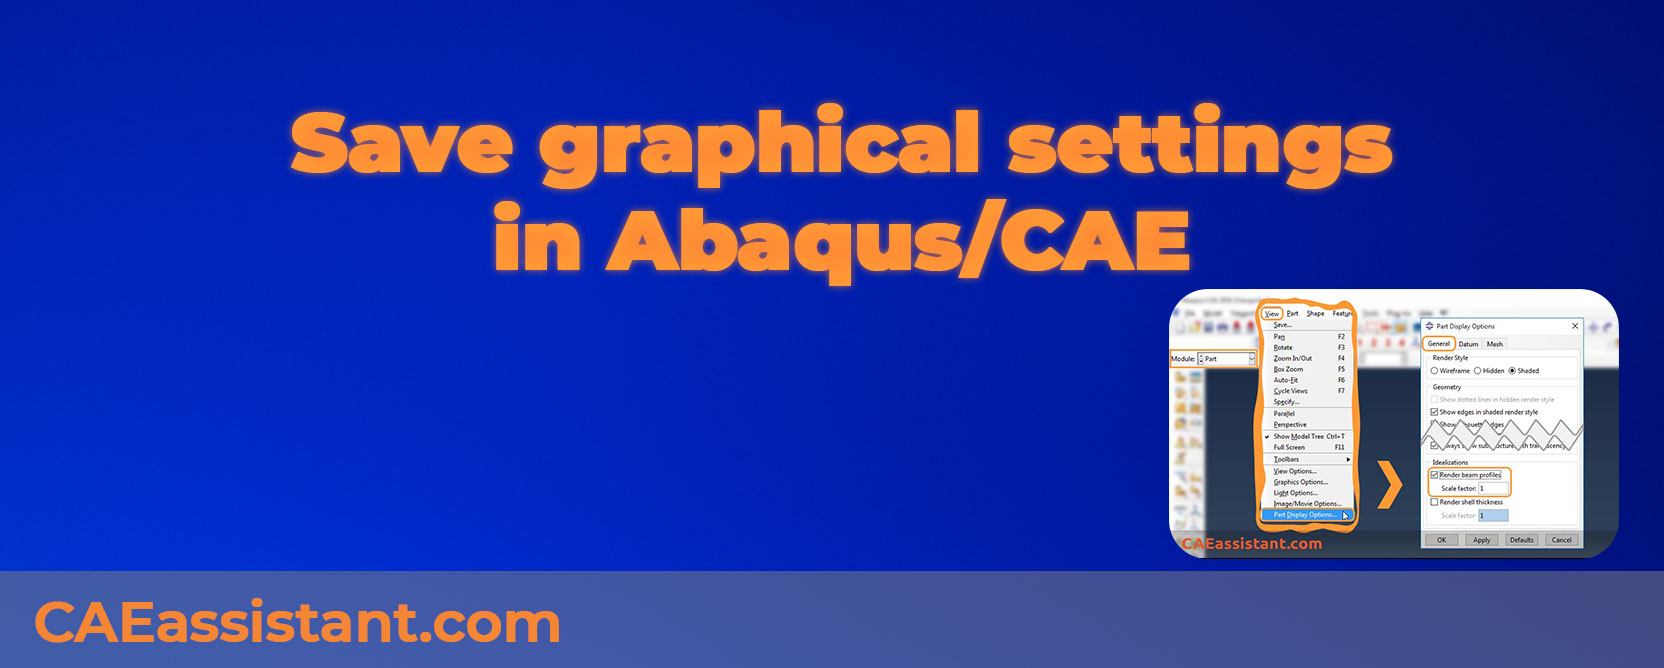 abaqus graphical setting